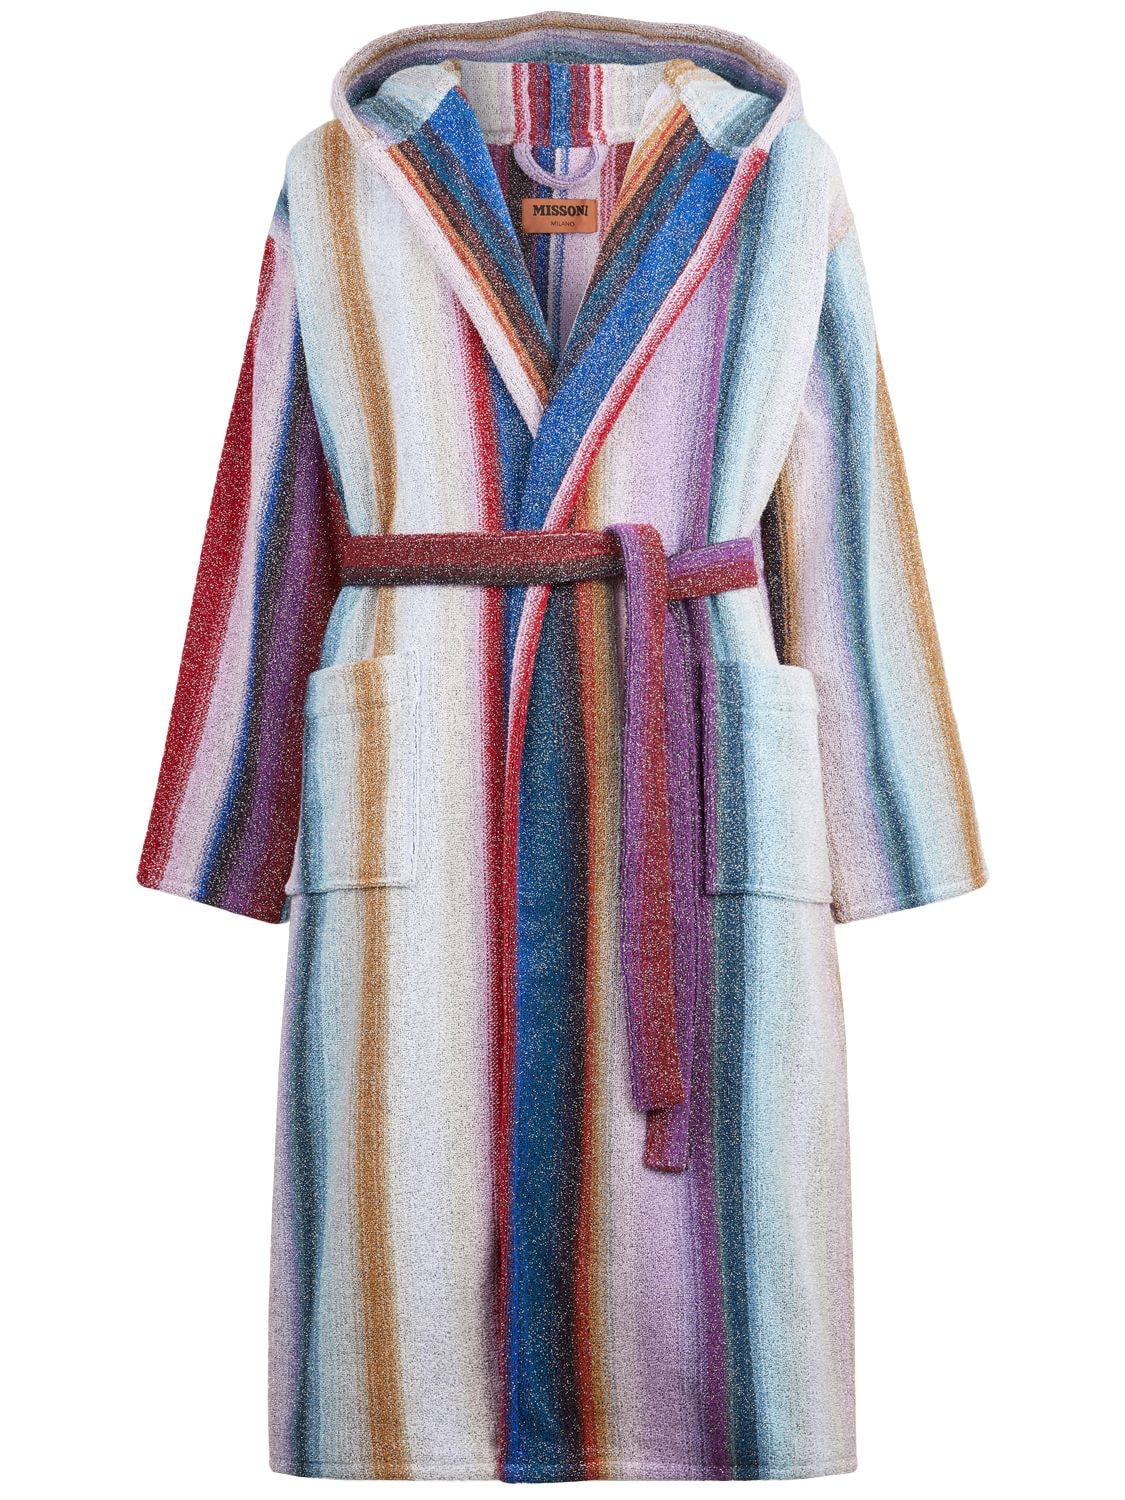 Missoni Home Collection Clancy Hooded Bathrobe In Blu Multicolor